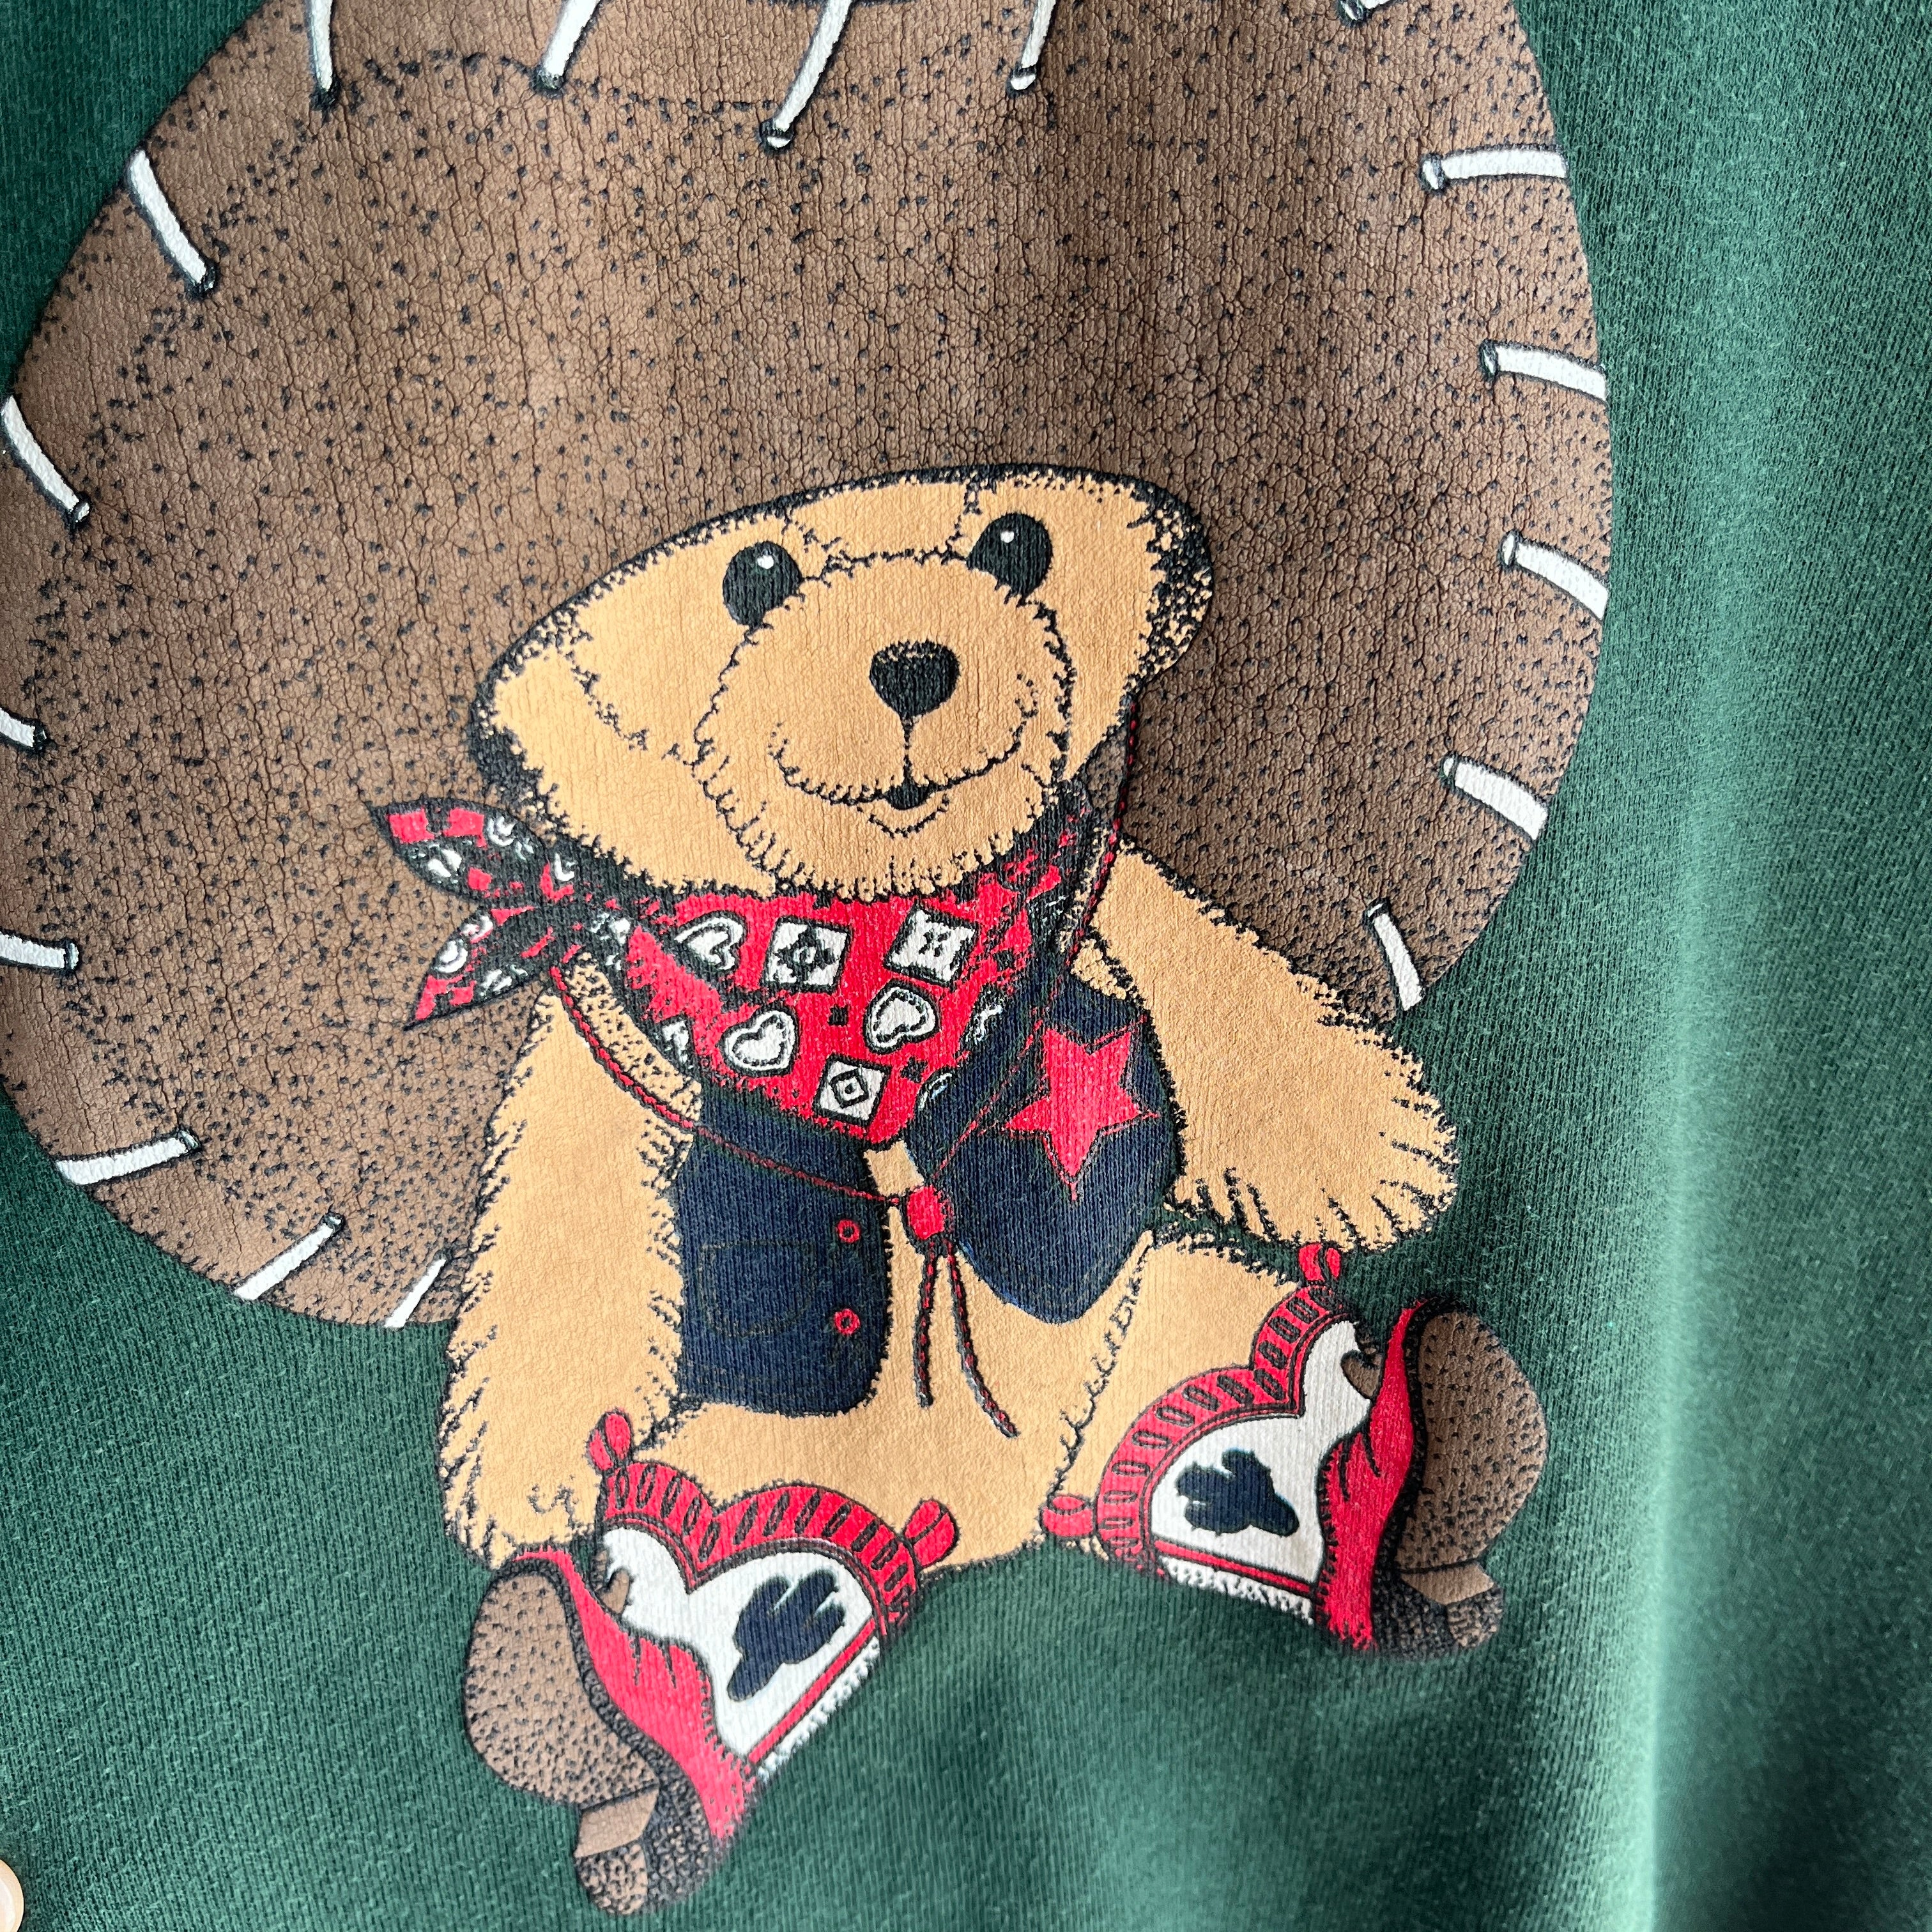 1980s Built In Turtle Neck Cowboy Teddy Bear Sweatshirt - Yes, This Exists